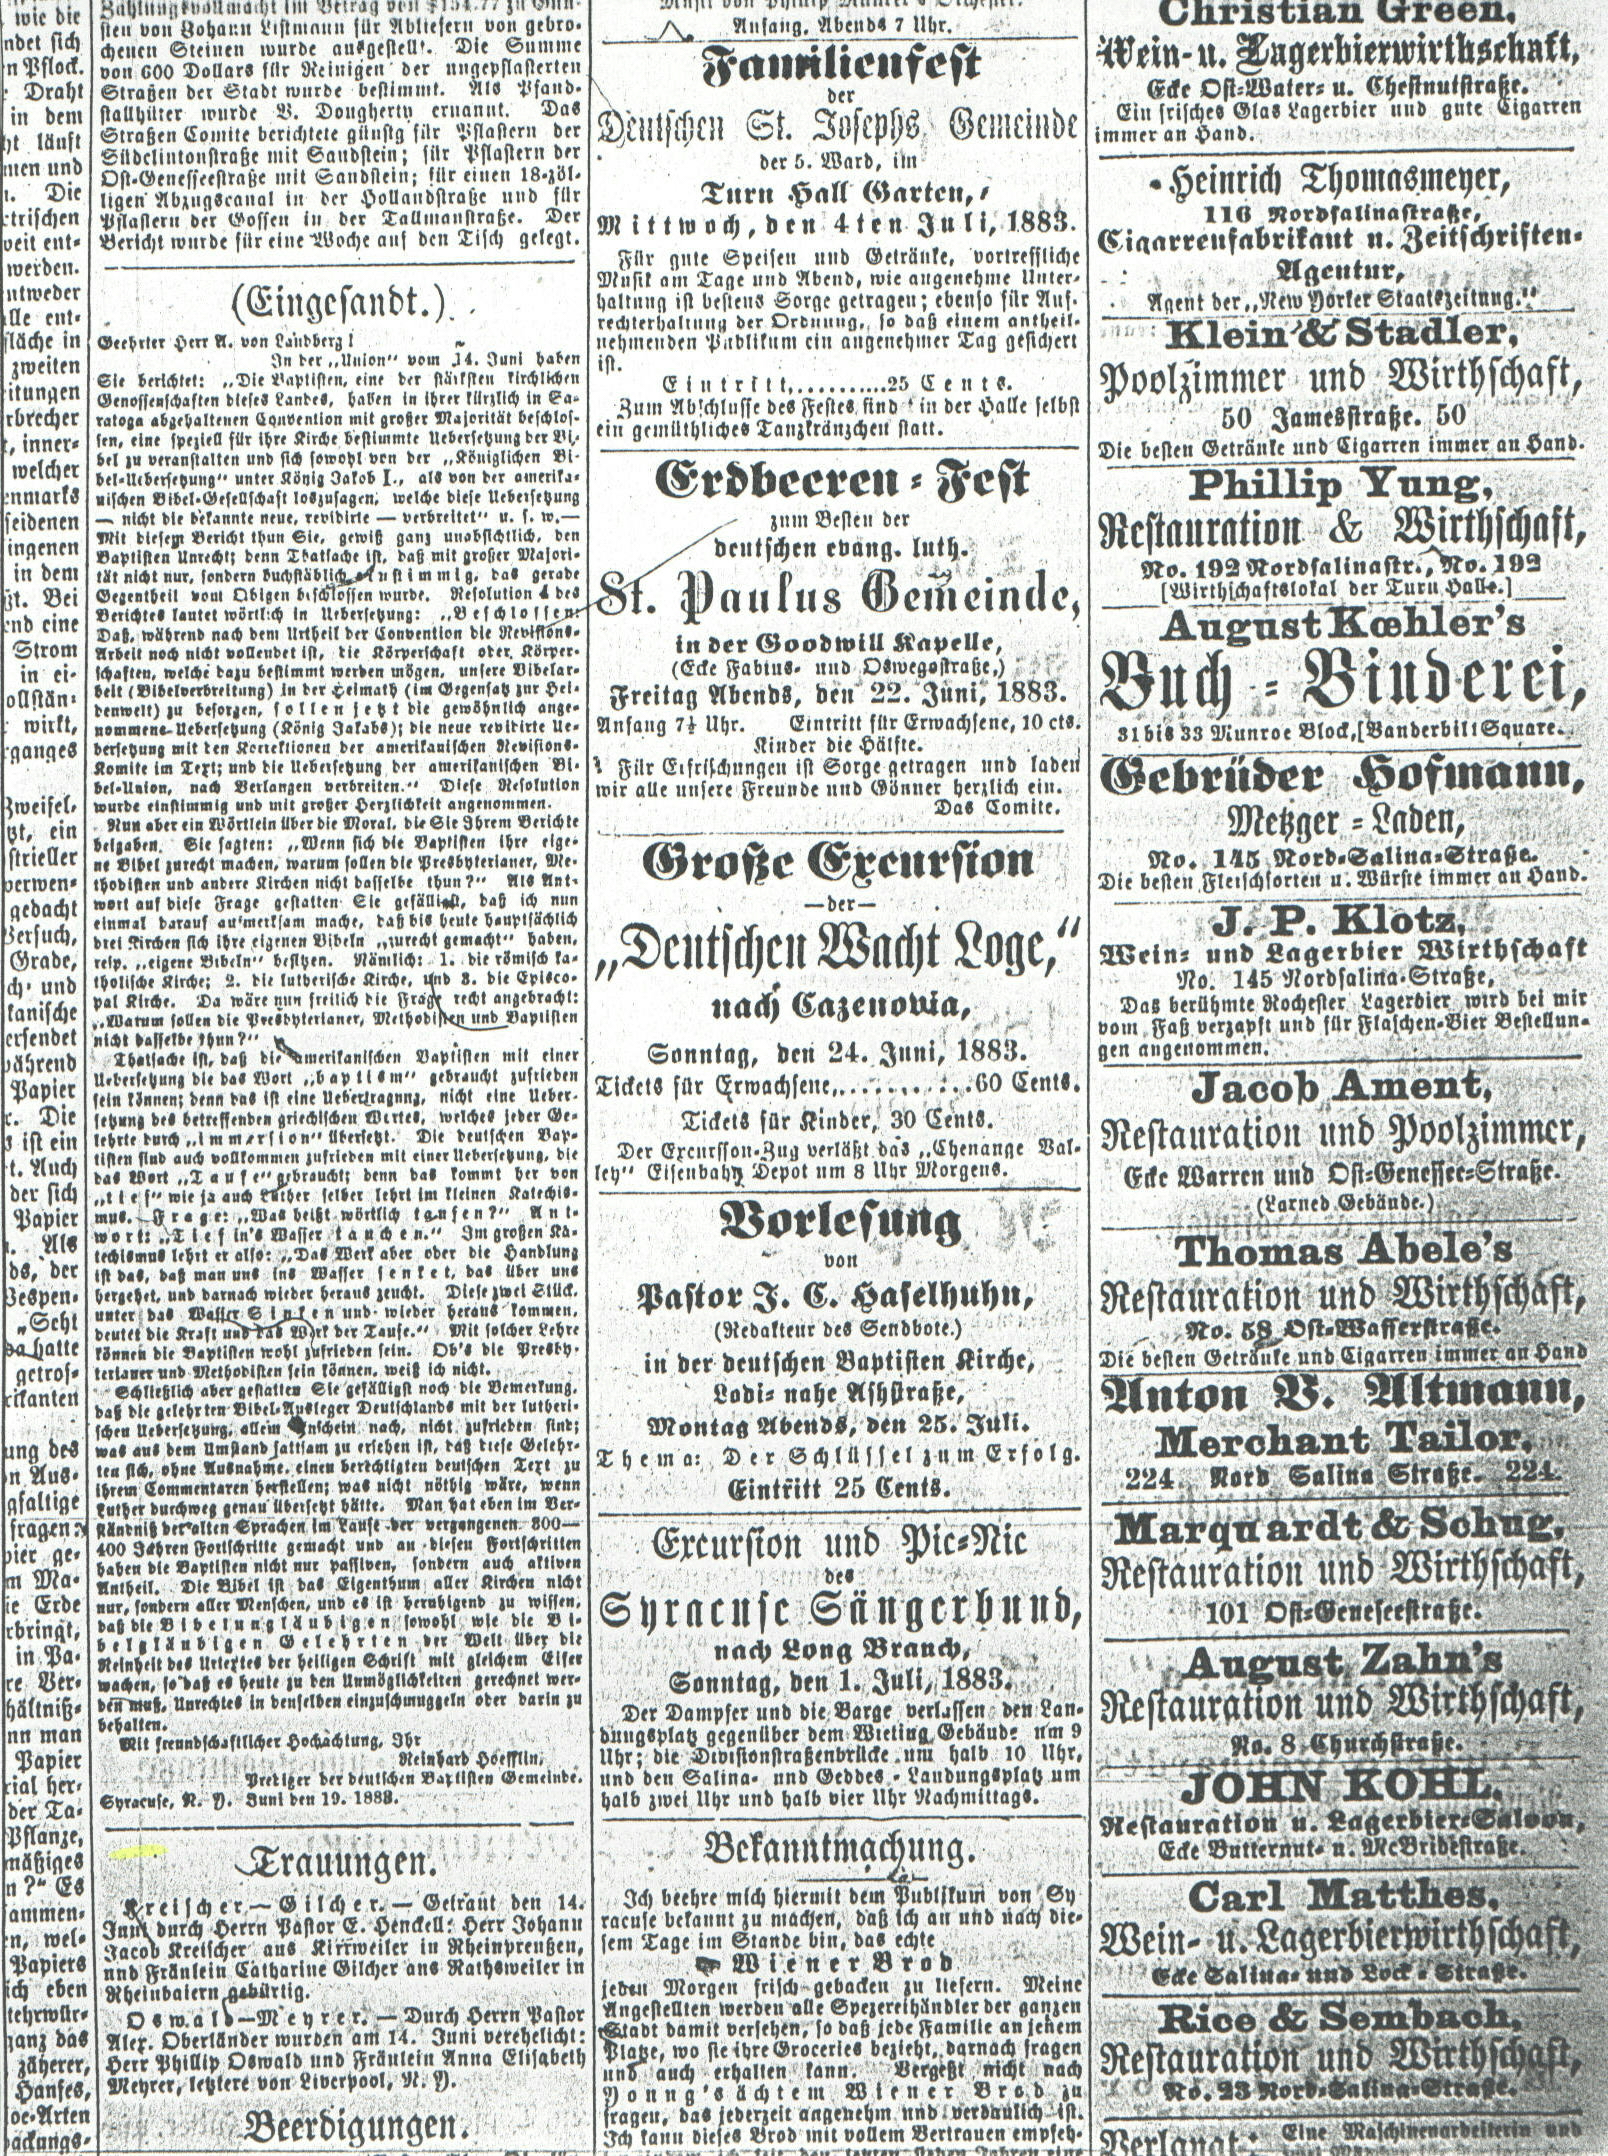 ads from the Syracuse Union, 21 
June 1883